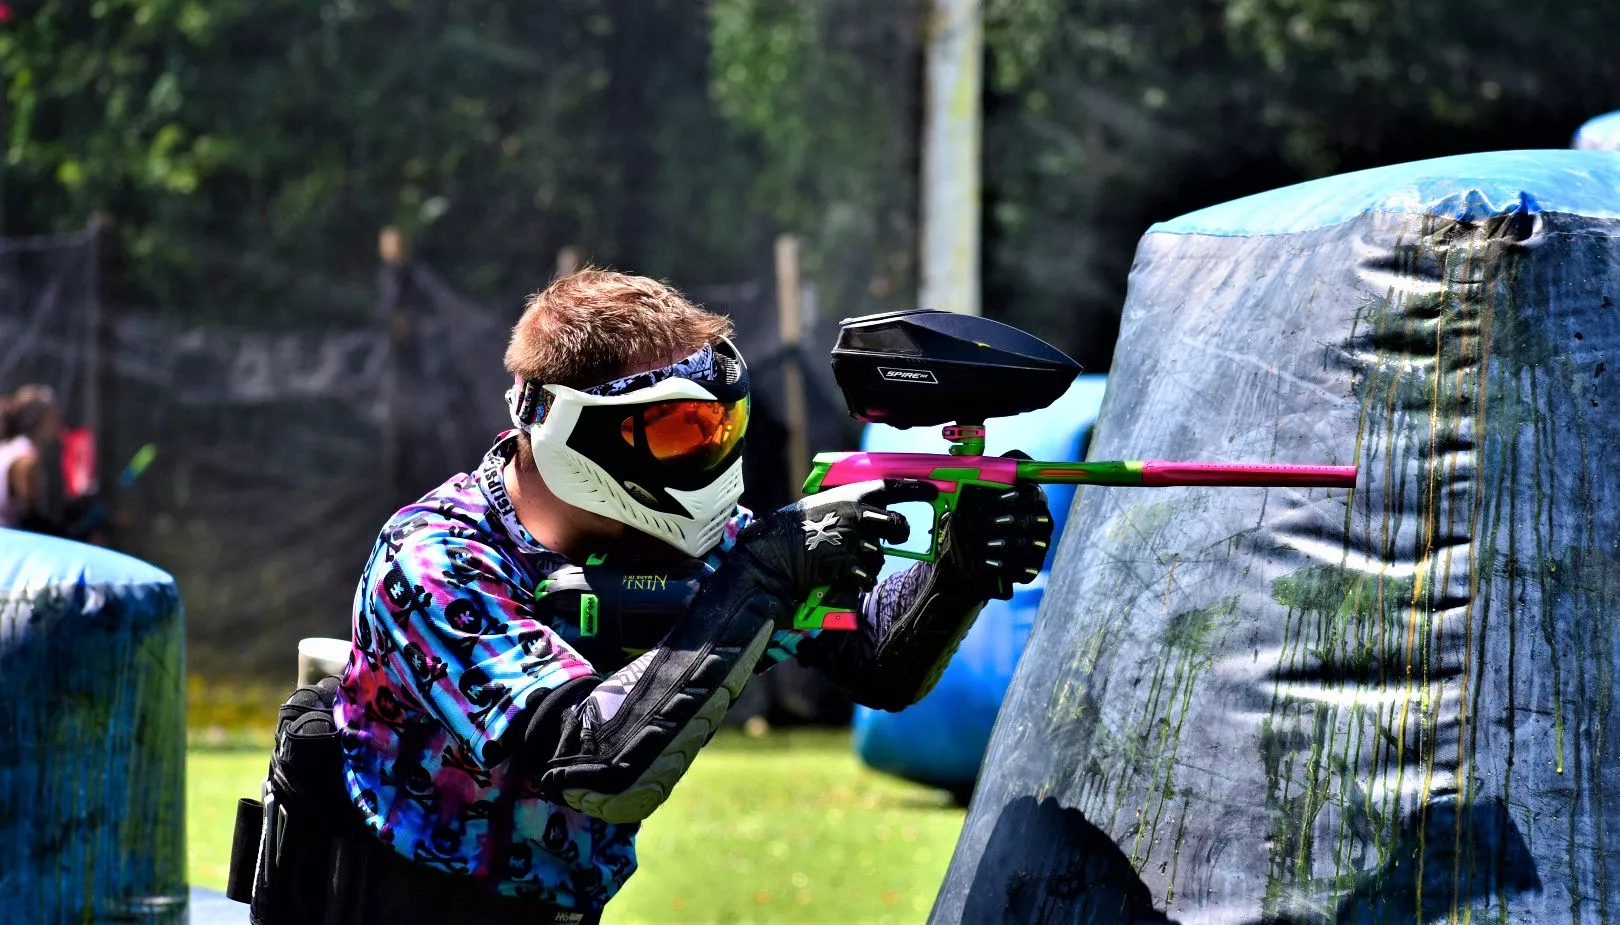 NR Paintball in USA, North America | Paintball - Rated 4.6